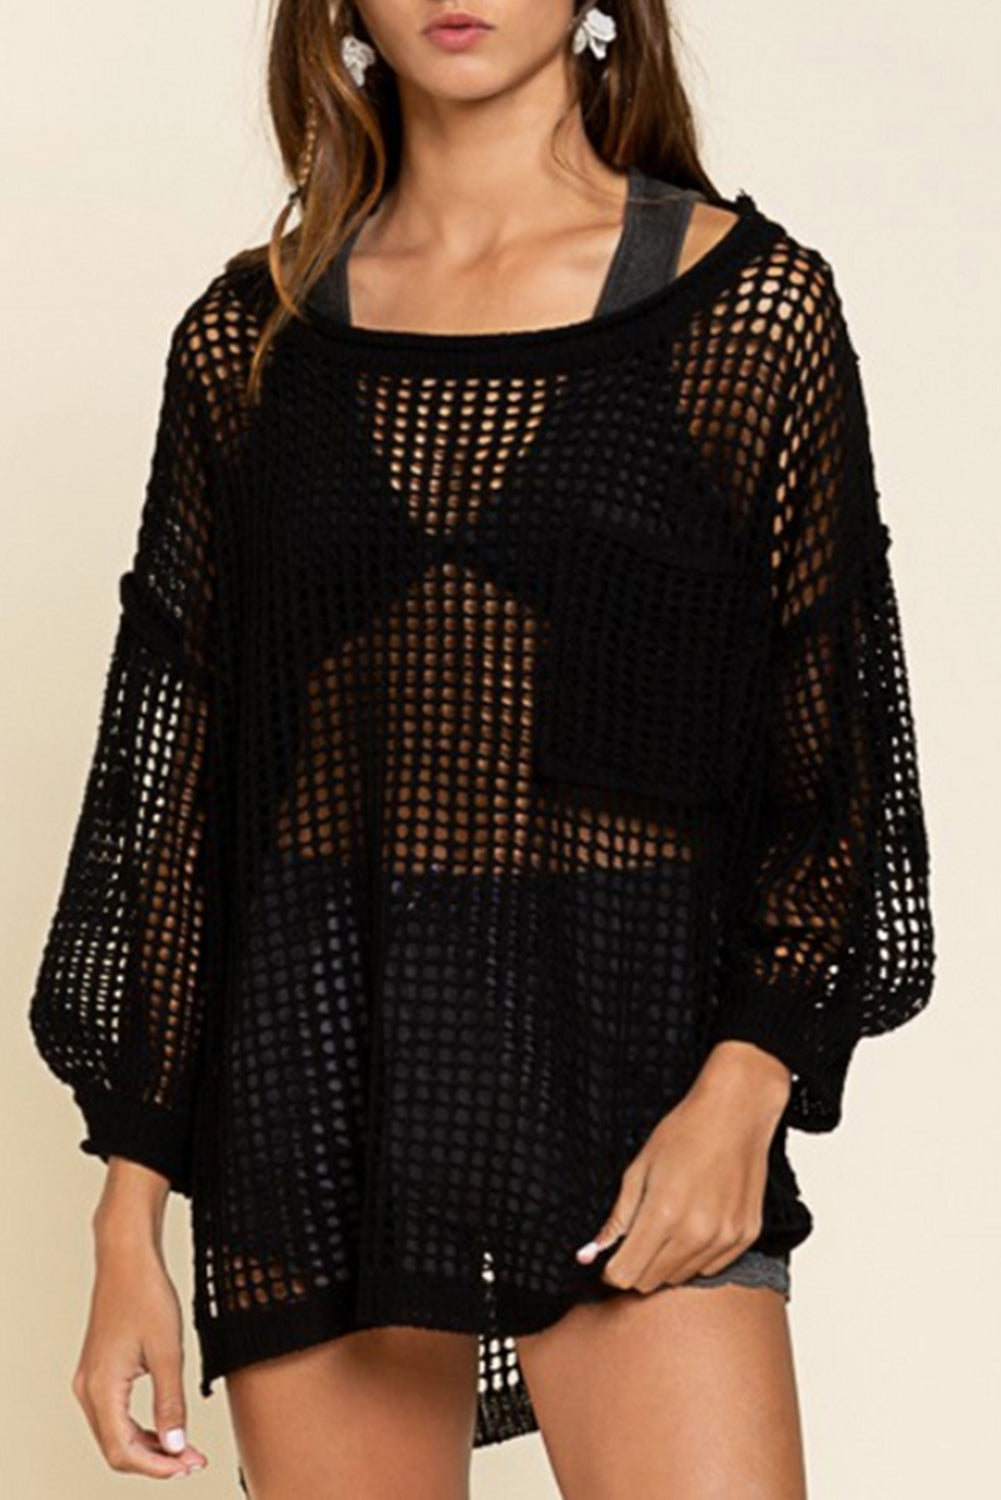 Black Fishnet Hollow-out Long Sleeve Beach Cover up - Babbazon Cover-ups